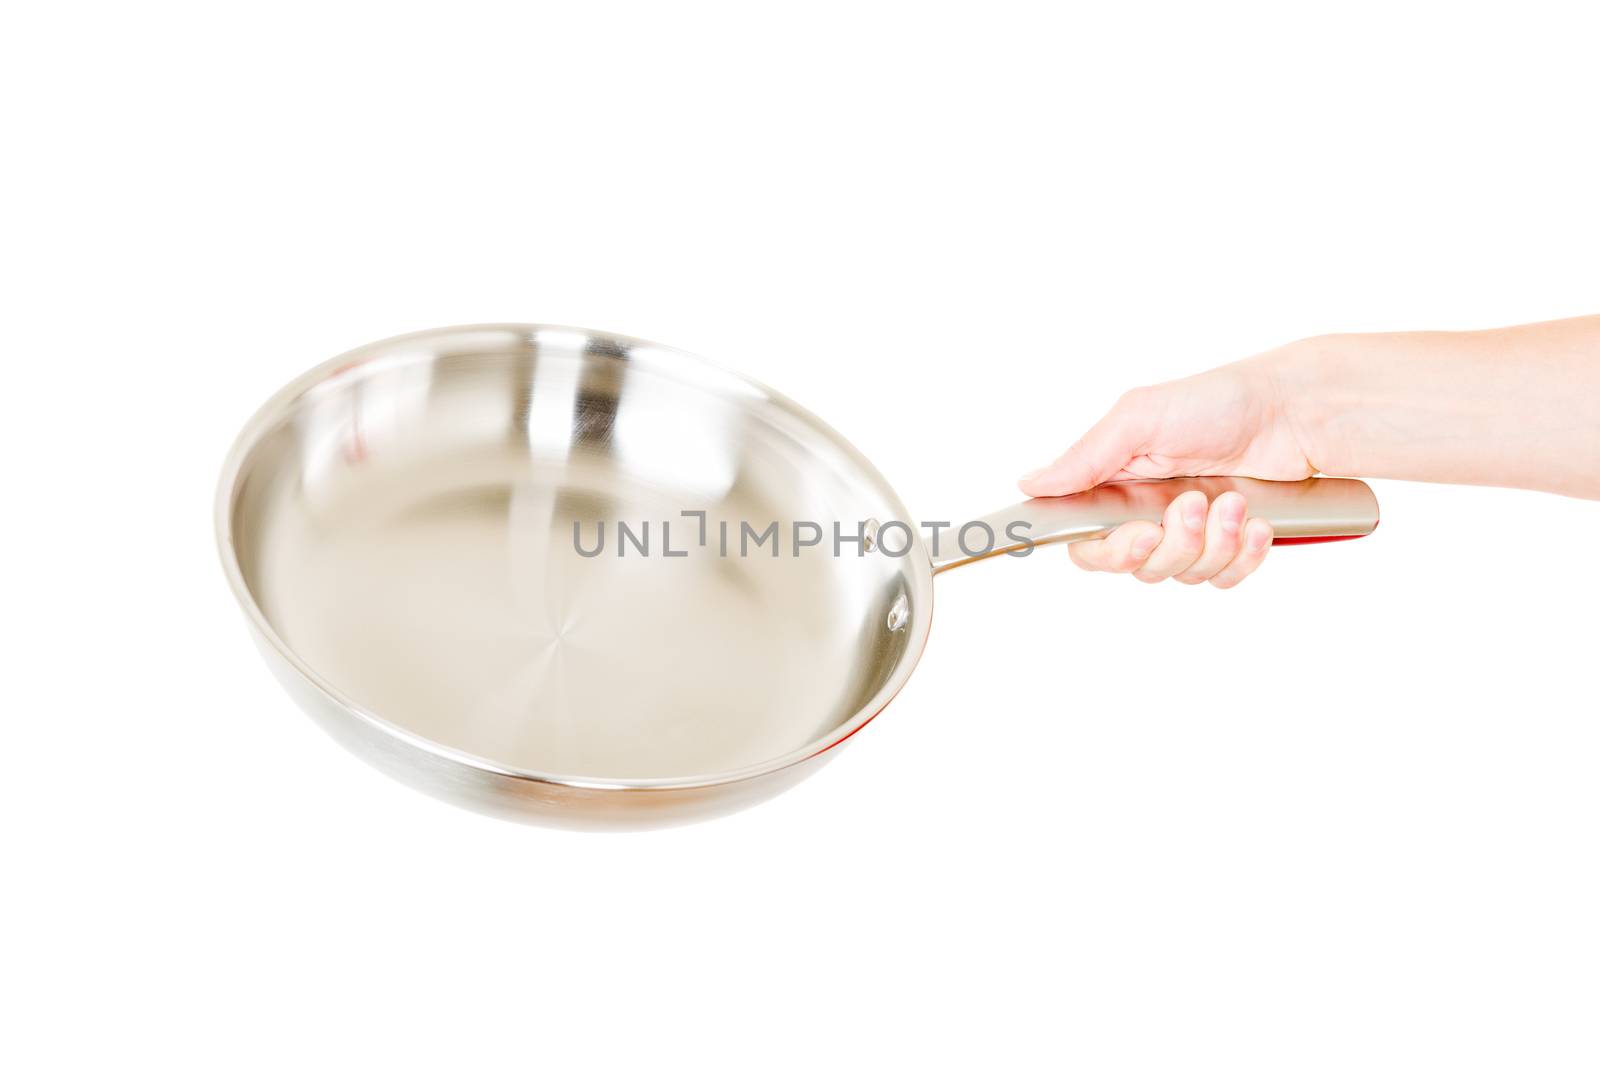 Steel frying pan hold by hand isolated on white background